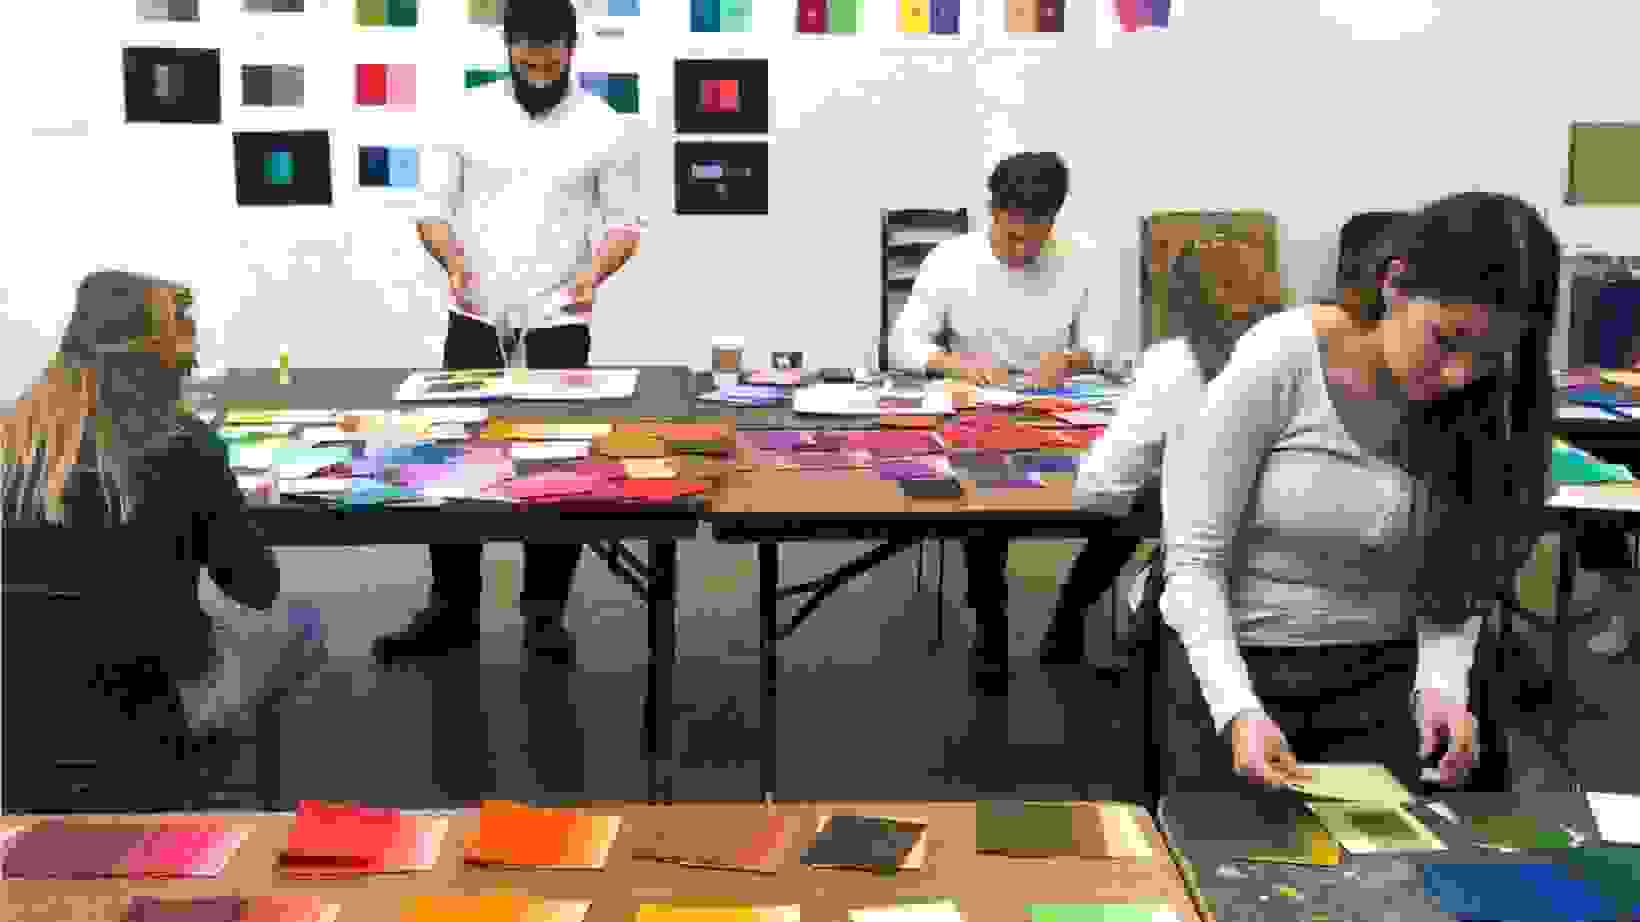 Students in a classroom work on color theory exercises, using sheets of colored paper.